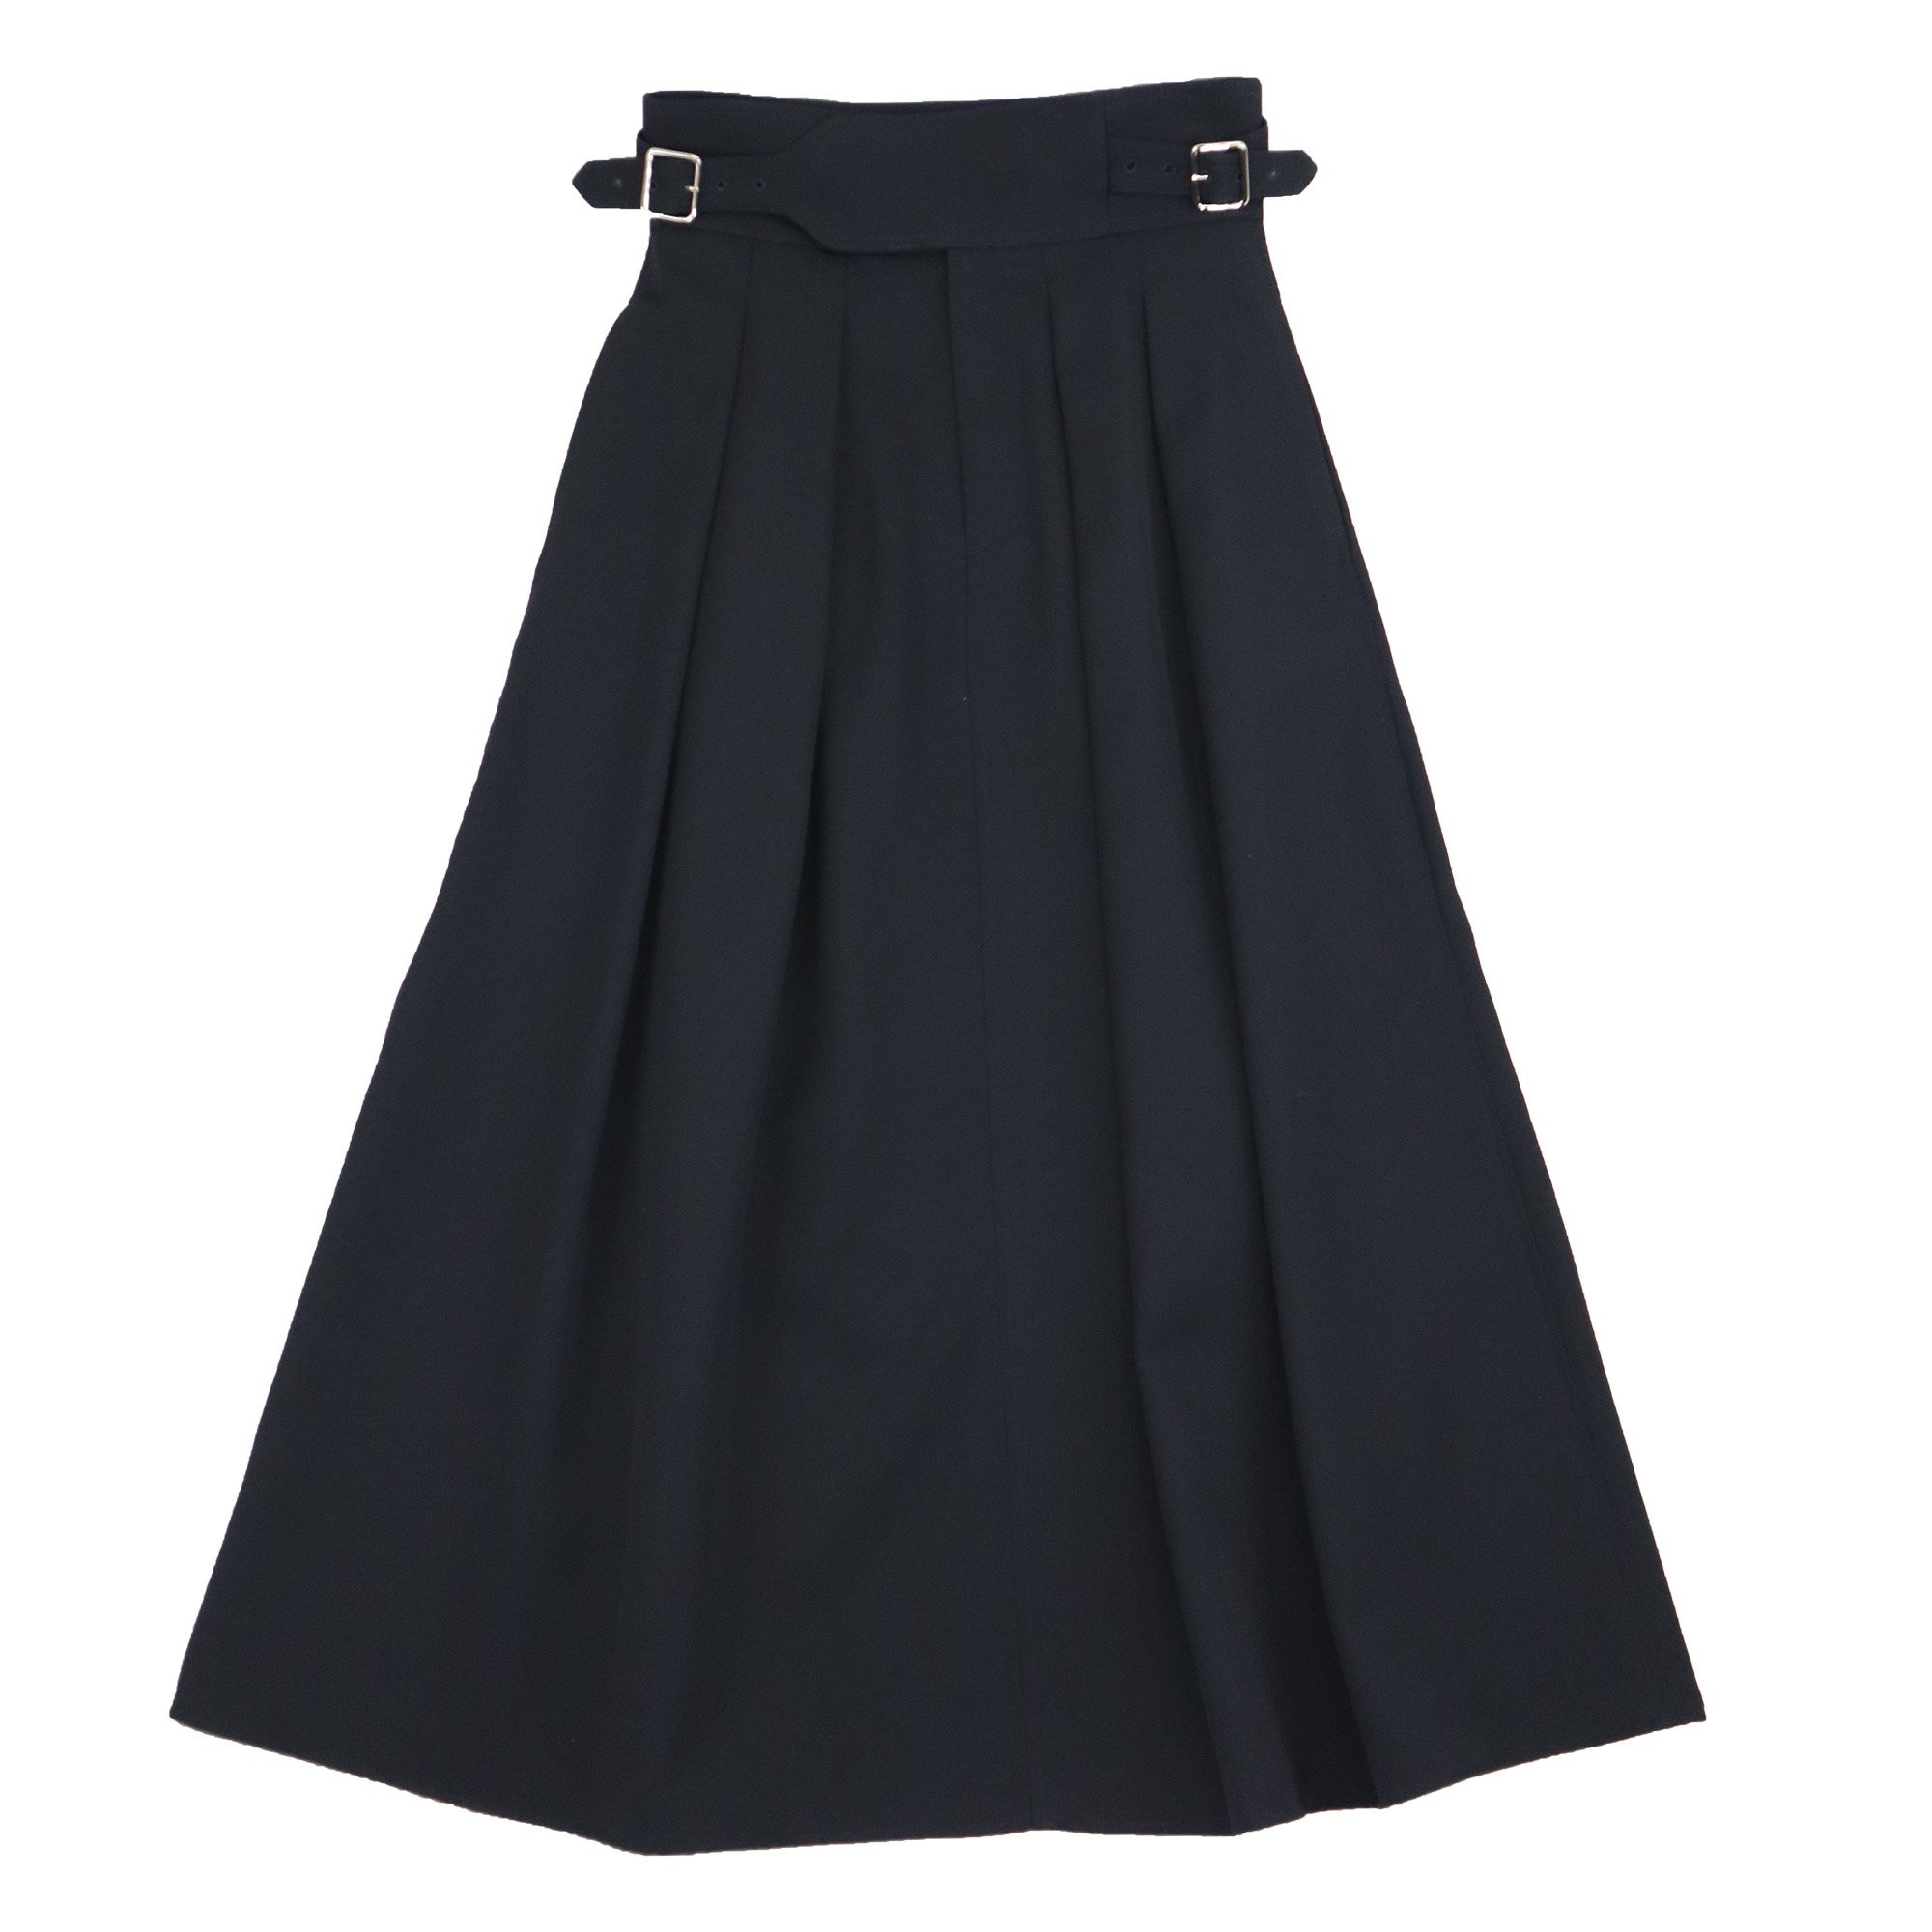 <img class='new_mark_img1' src='https://img.shop-pro.jp/img/new/icons6.gif' style='border:none;display:inline;margin:0px;padding:0px;width:auto;' />THE RERACS SKIRT【DARK NAVY】